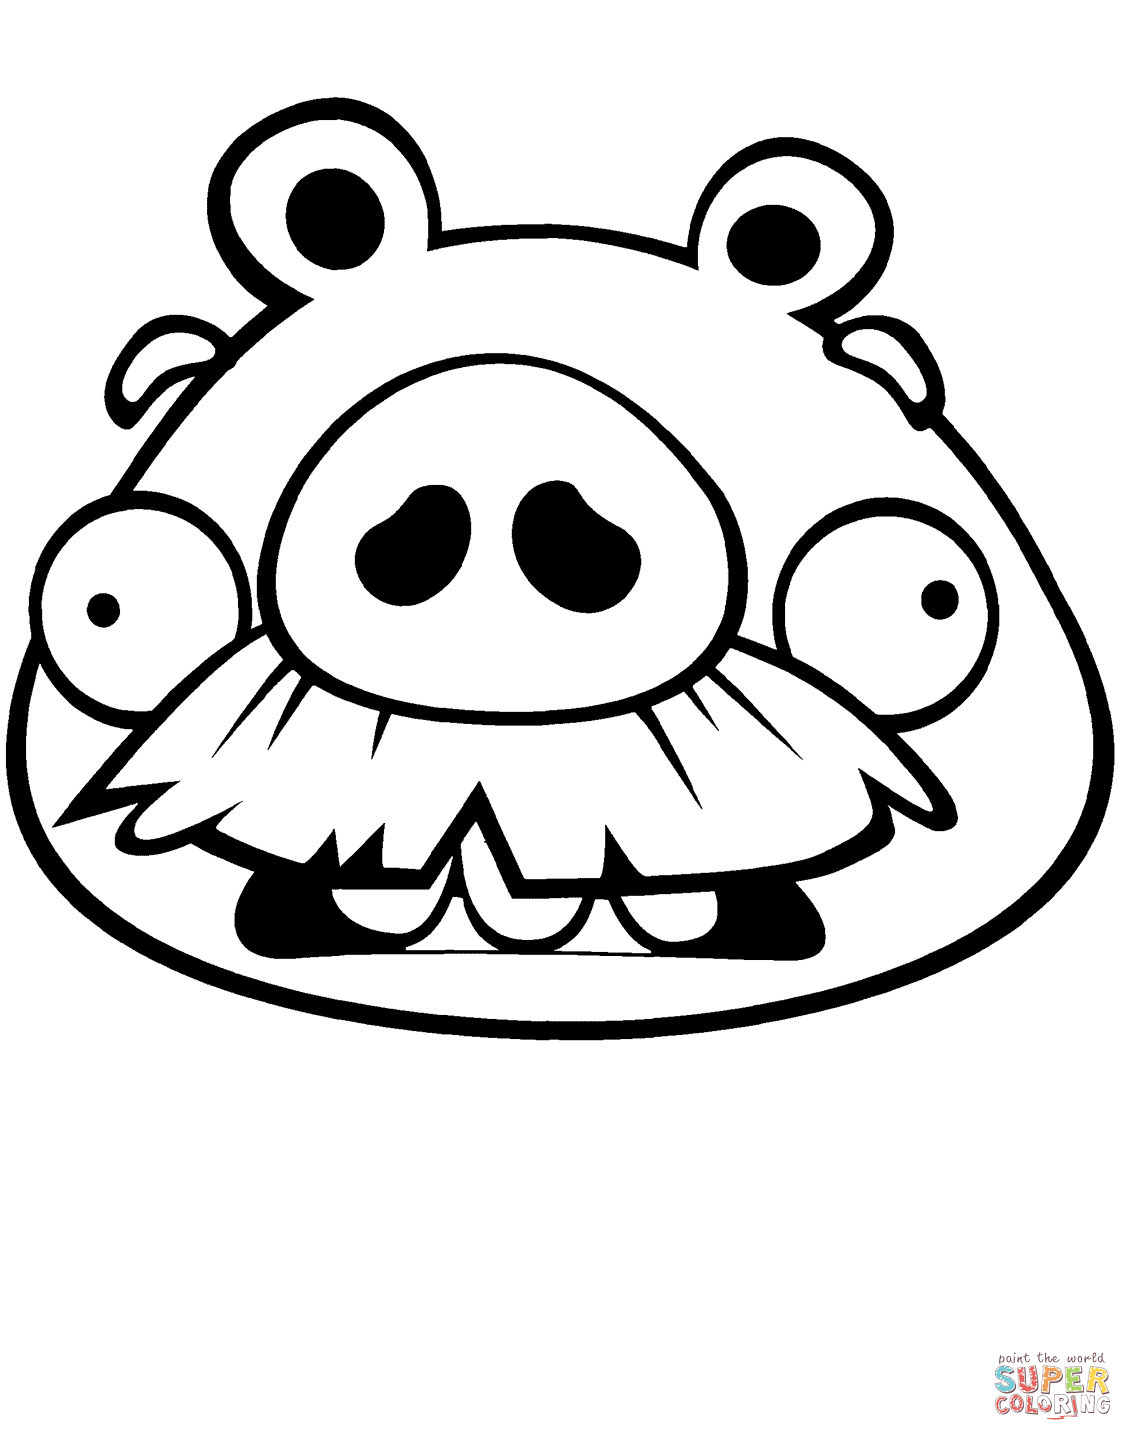 Foreman pig coloring page free printable coloring pages